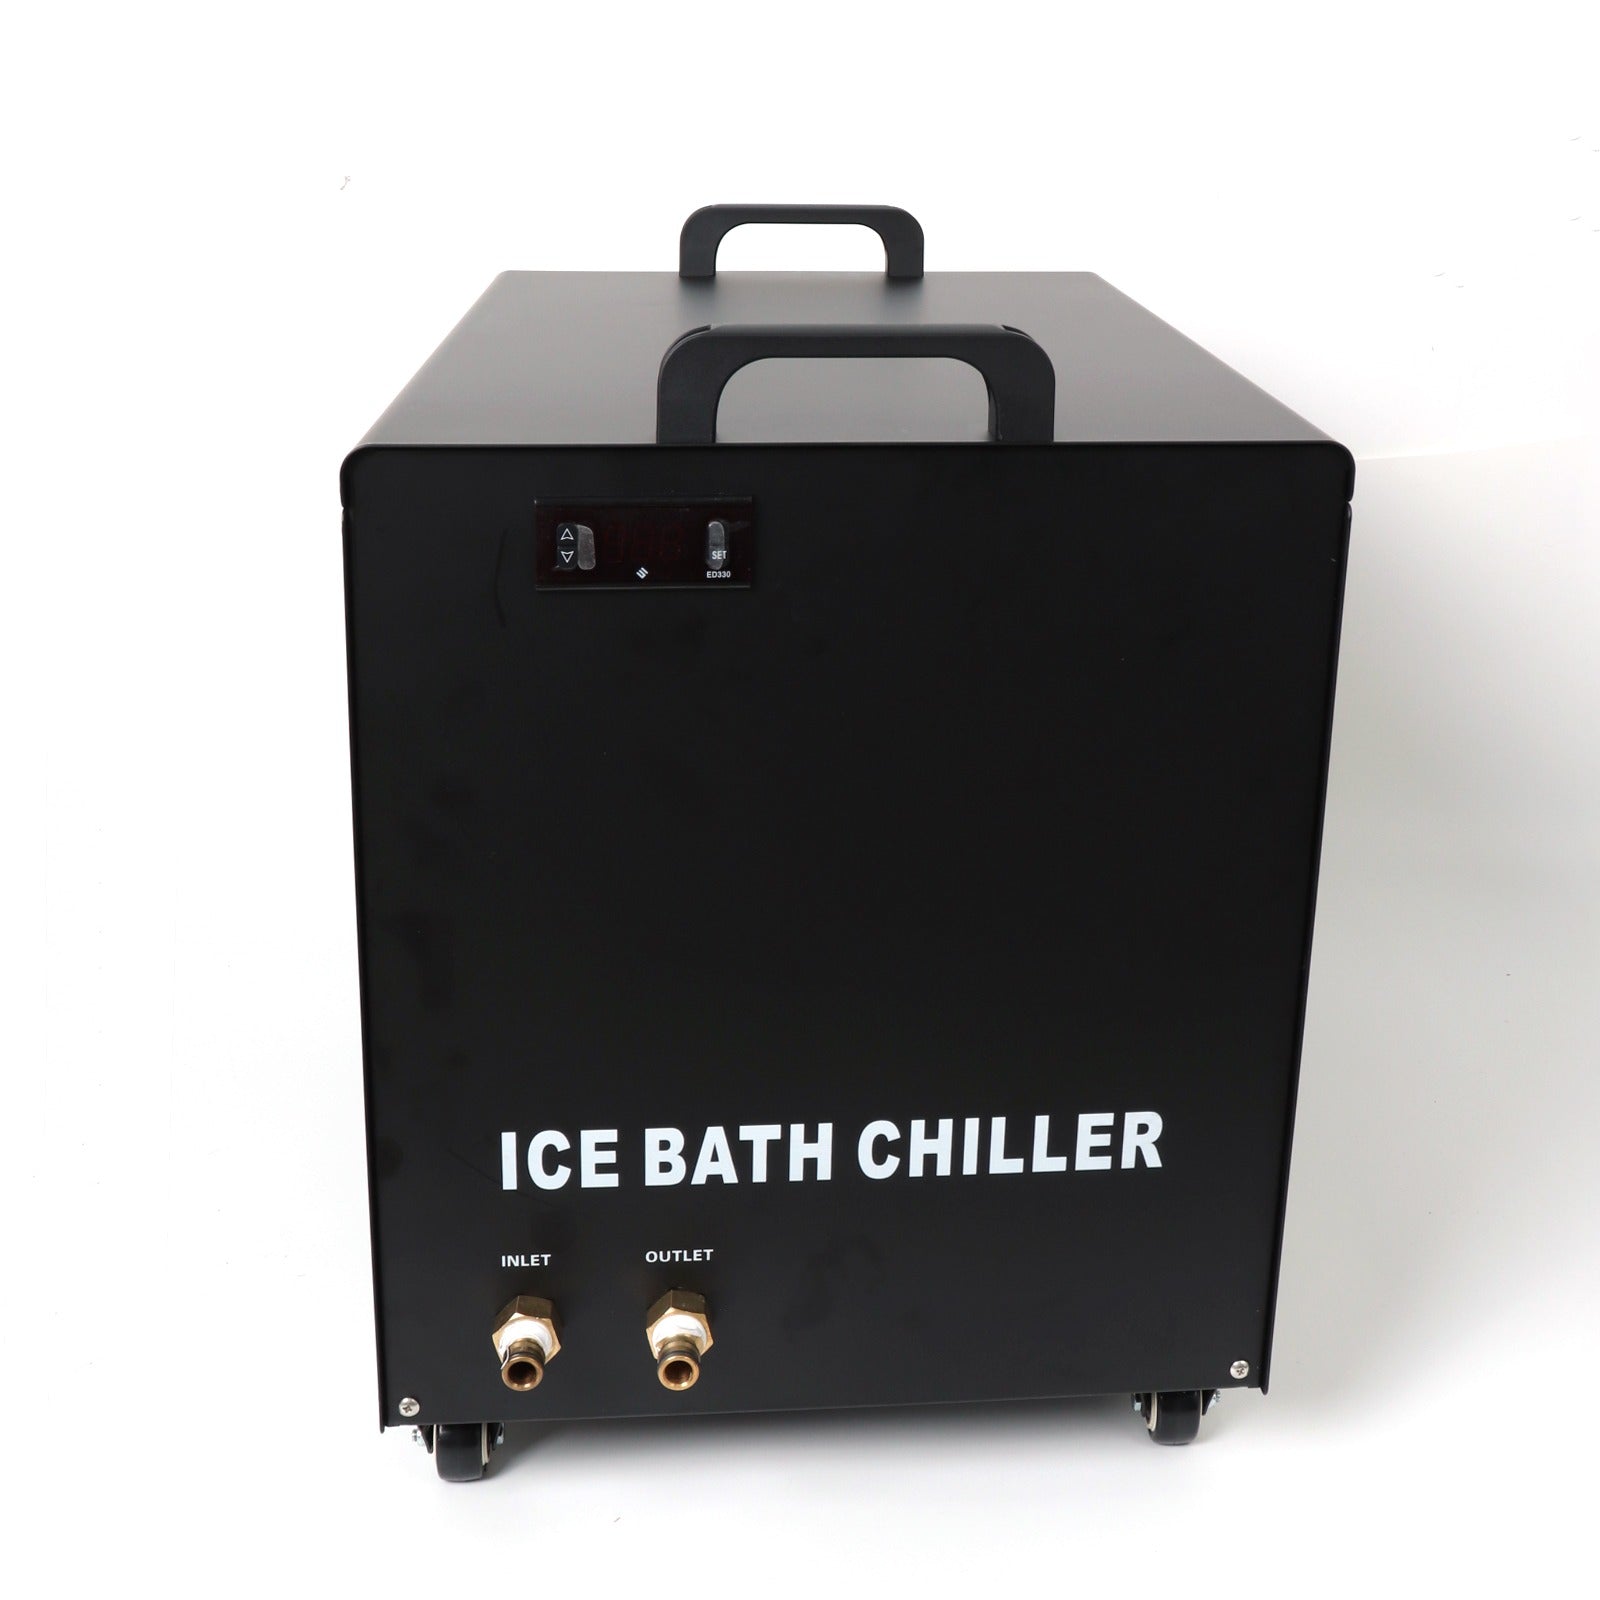 Ice bath chiller with build in filter